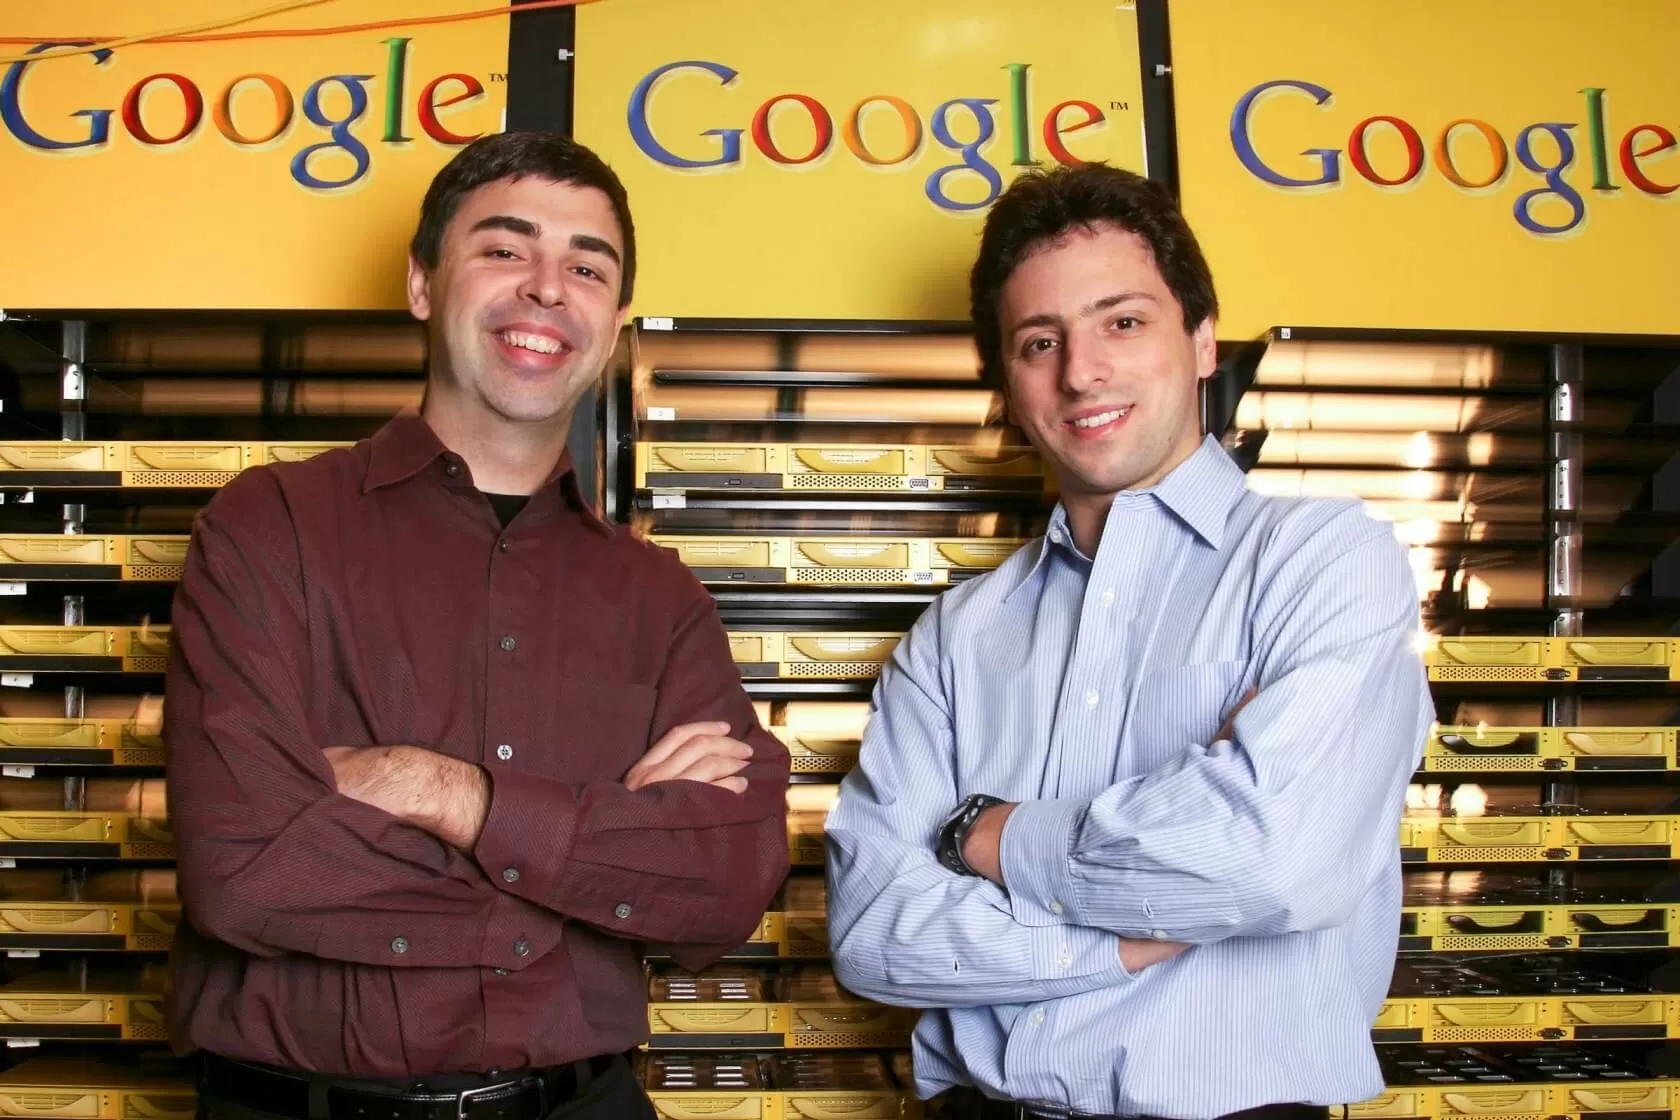 Google founders Sergey Brin and Larry Page step down from their Alphabet leadership roles